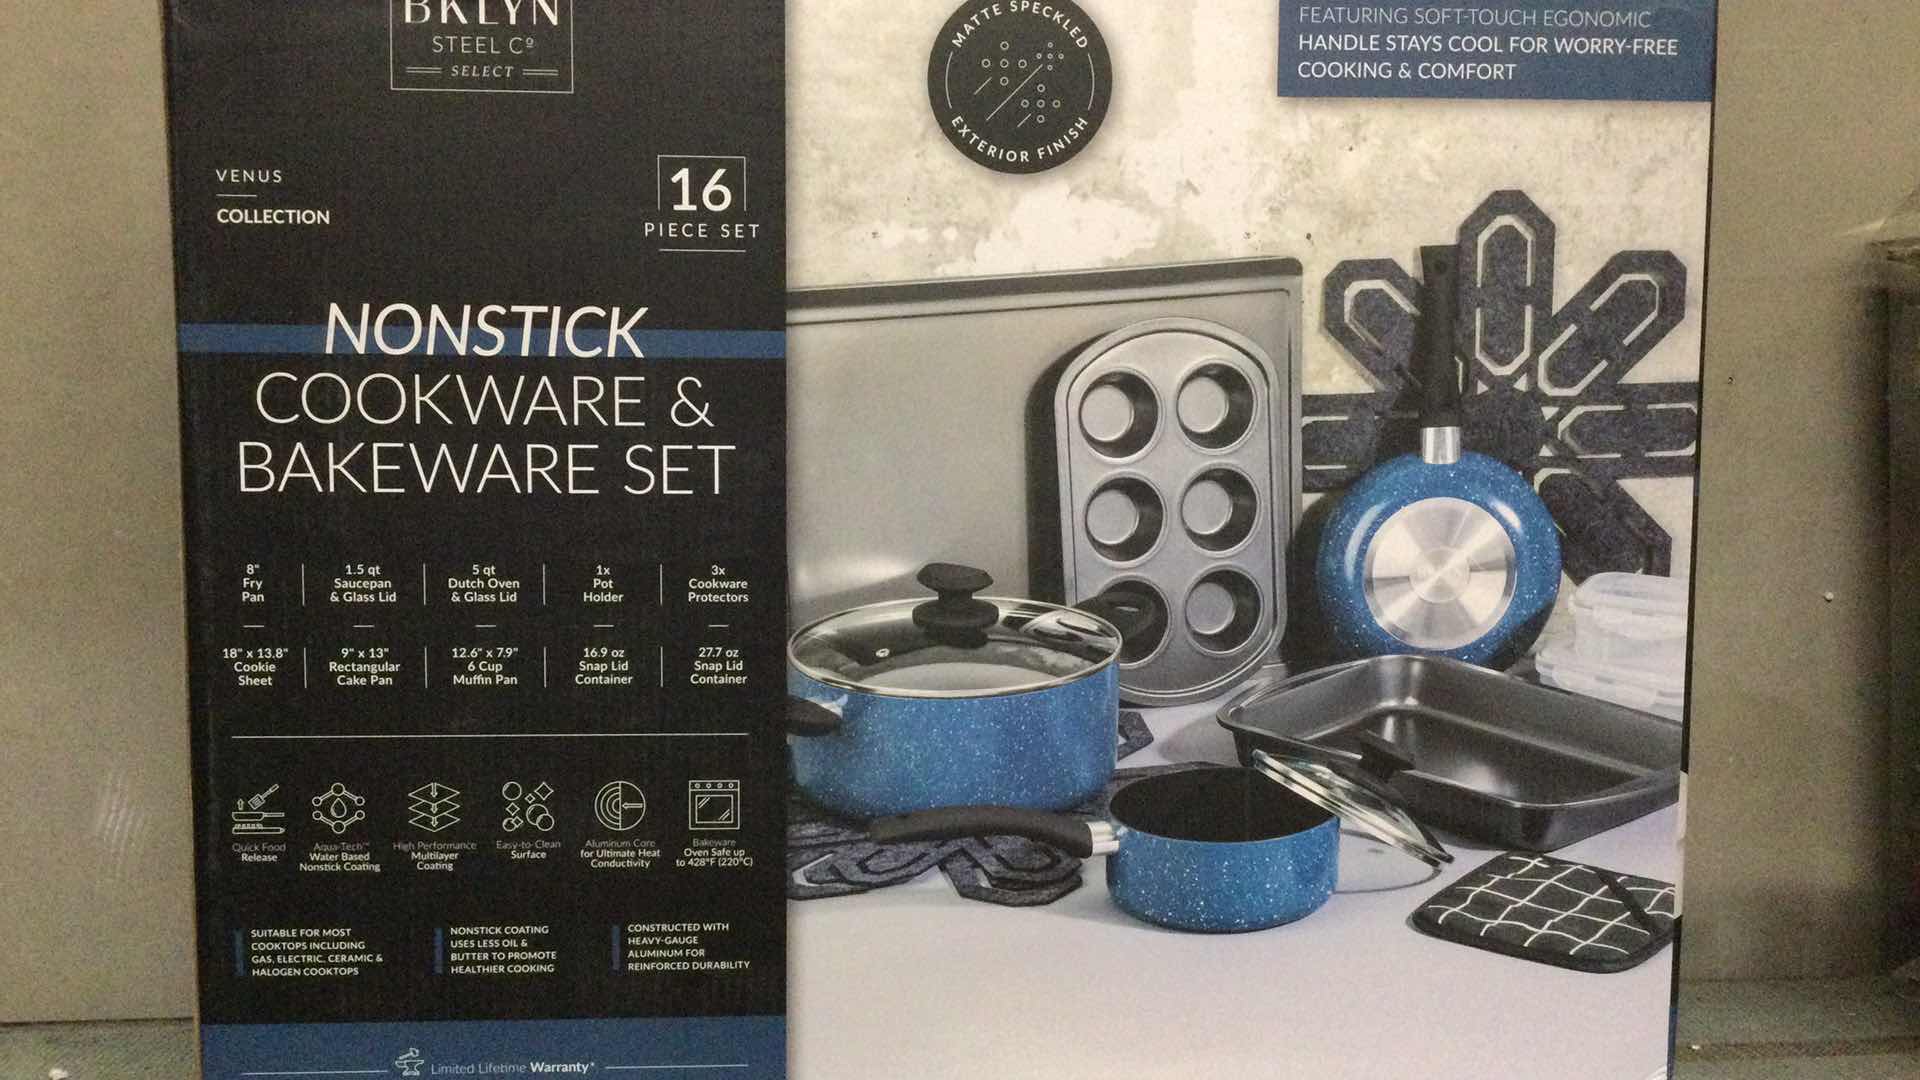 Photo 1 of NEW BKLYN VENUS COLLECTION 16PC NON-STICK COOK & BAKEWARE SET